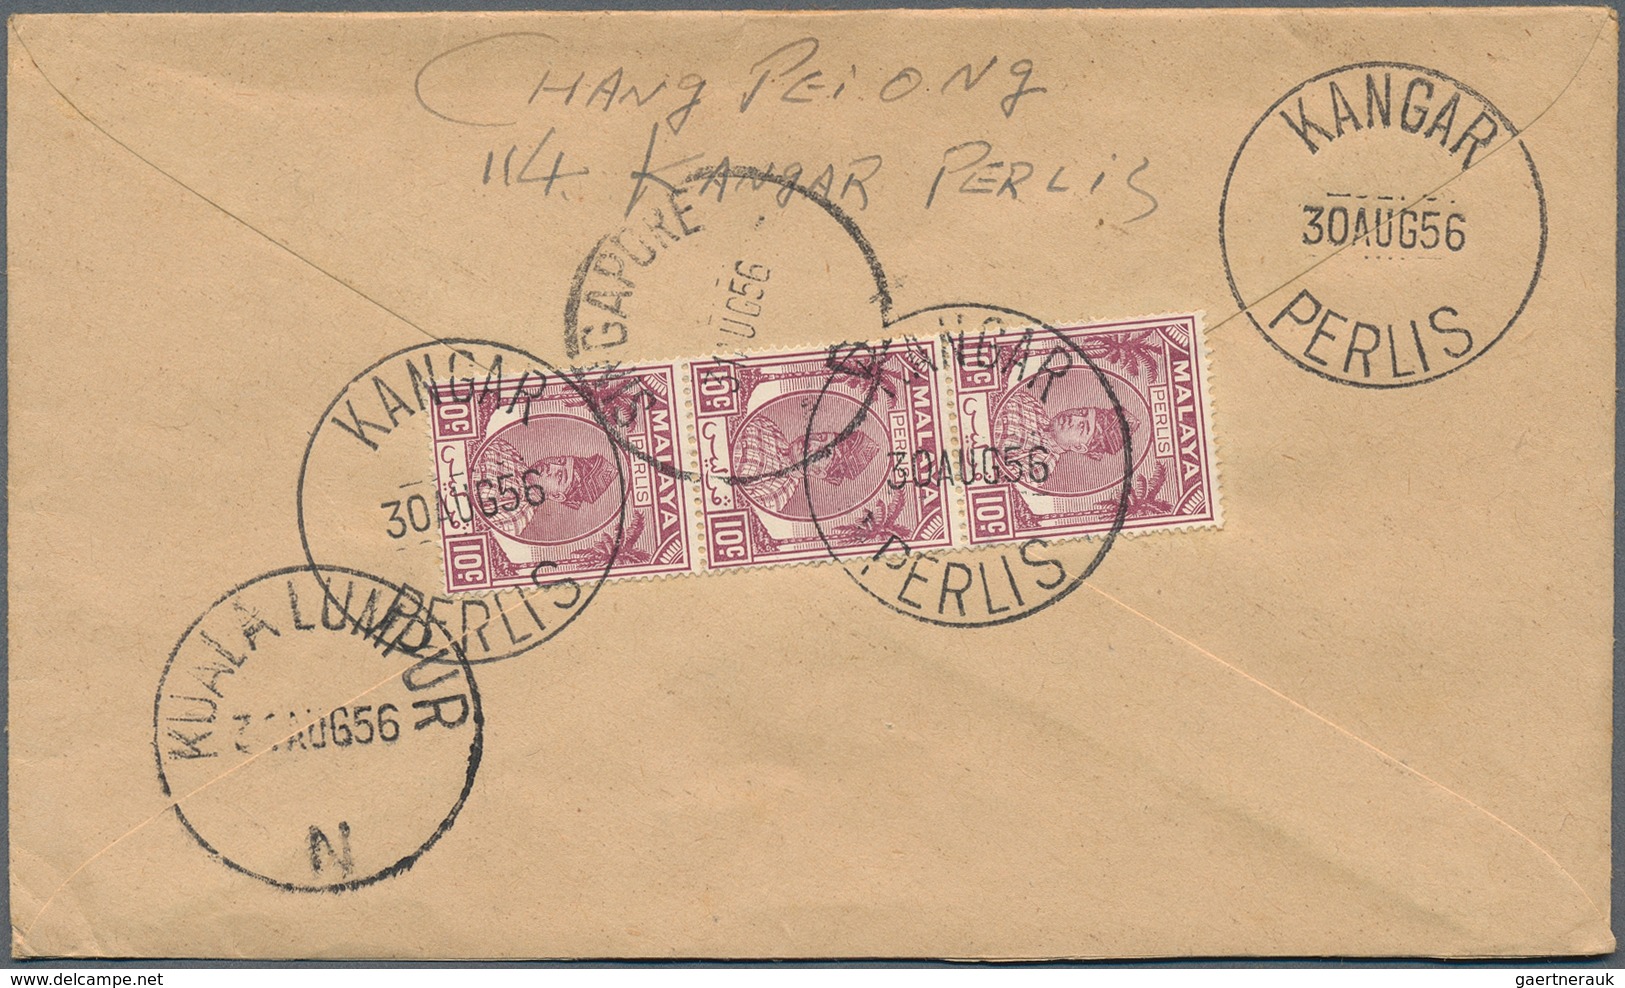 Malaiische Staaten - Perlis: 1950's-1970's: Group Of 26 Covers From Various Post Offices In Perlis, - Perlis